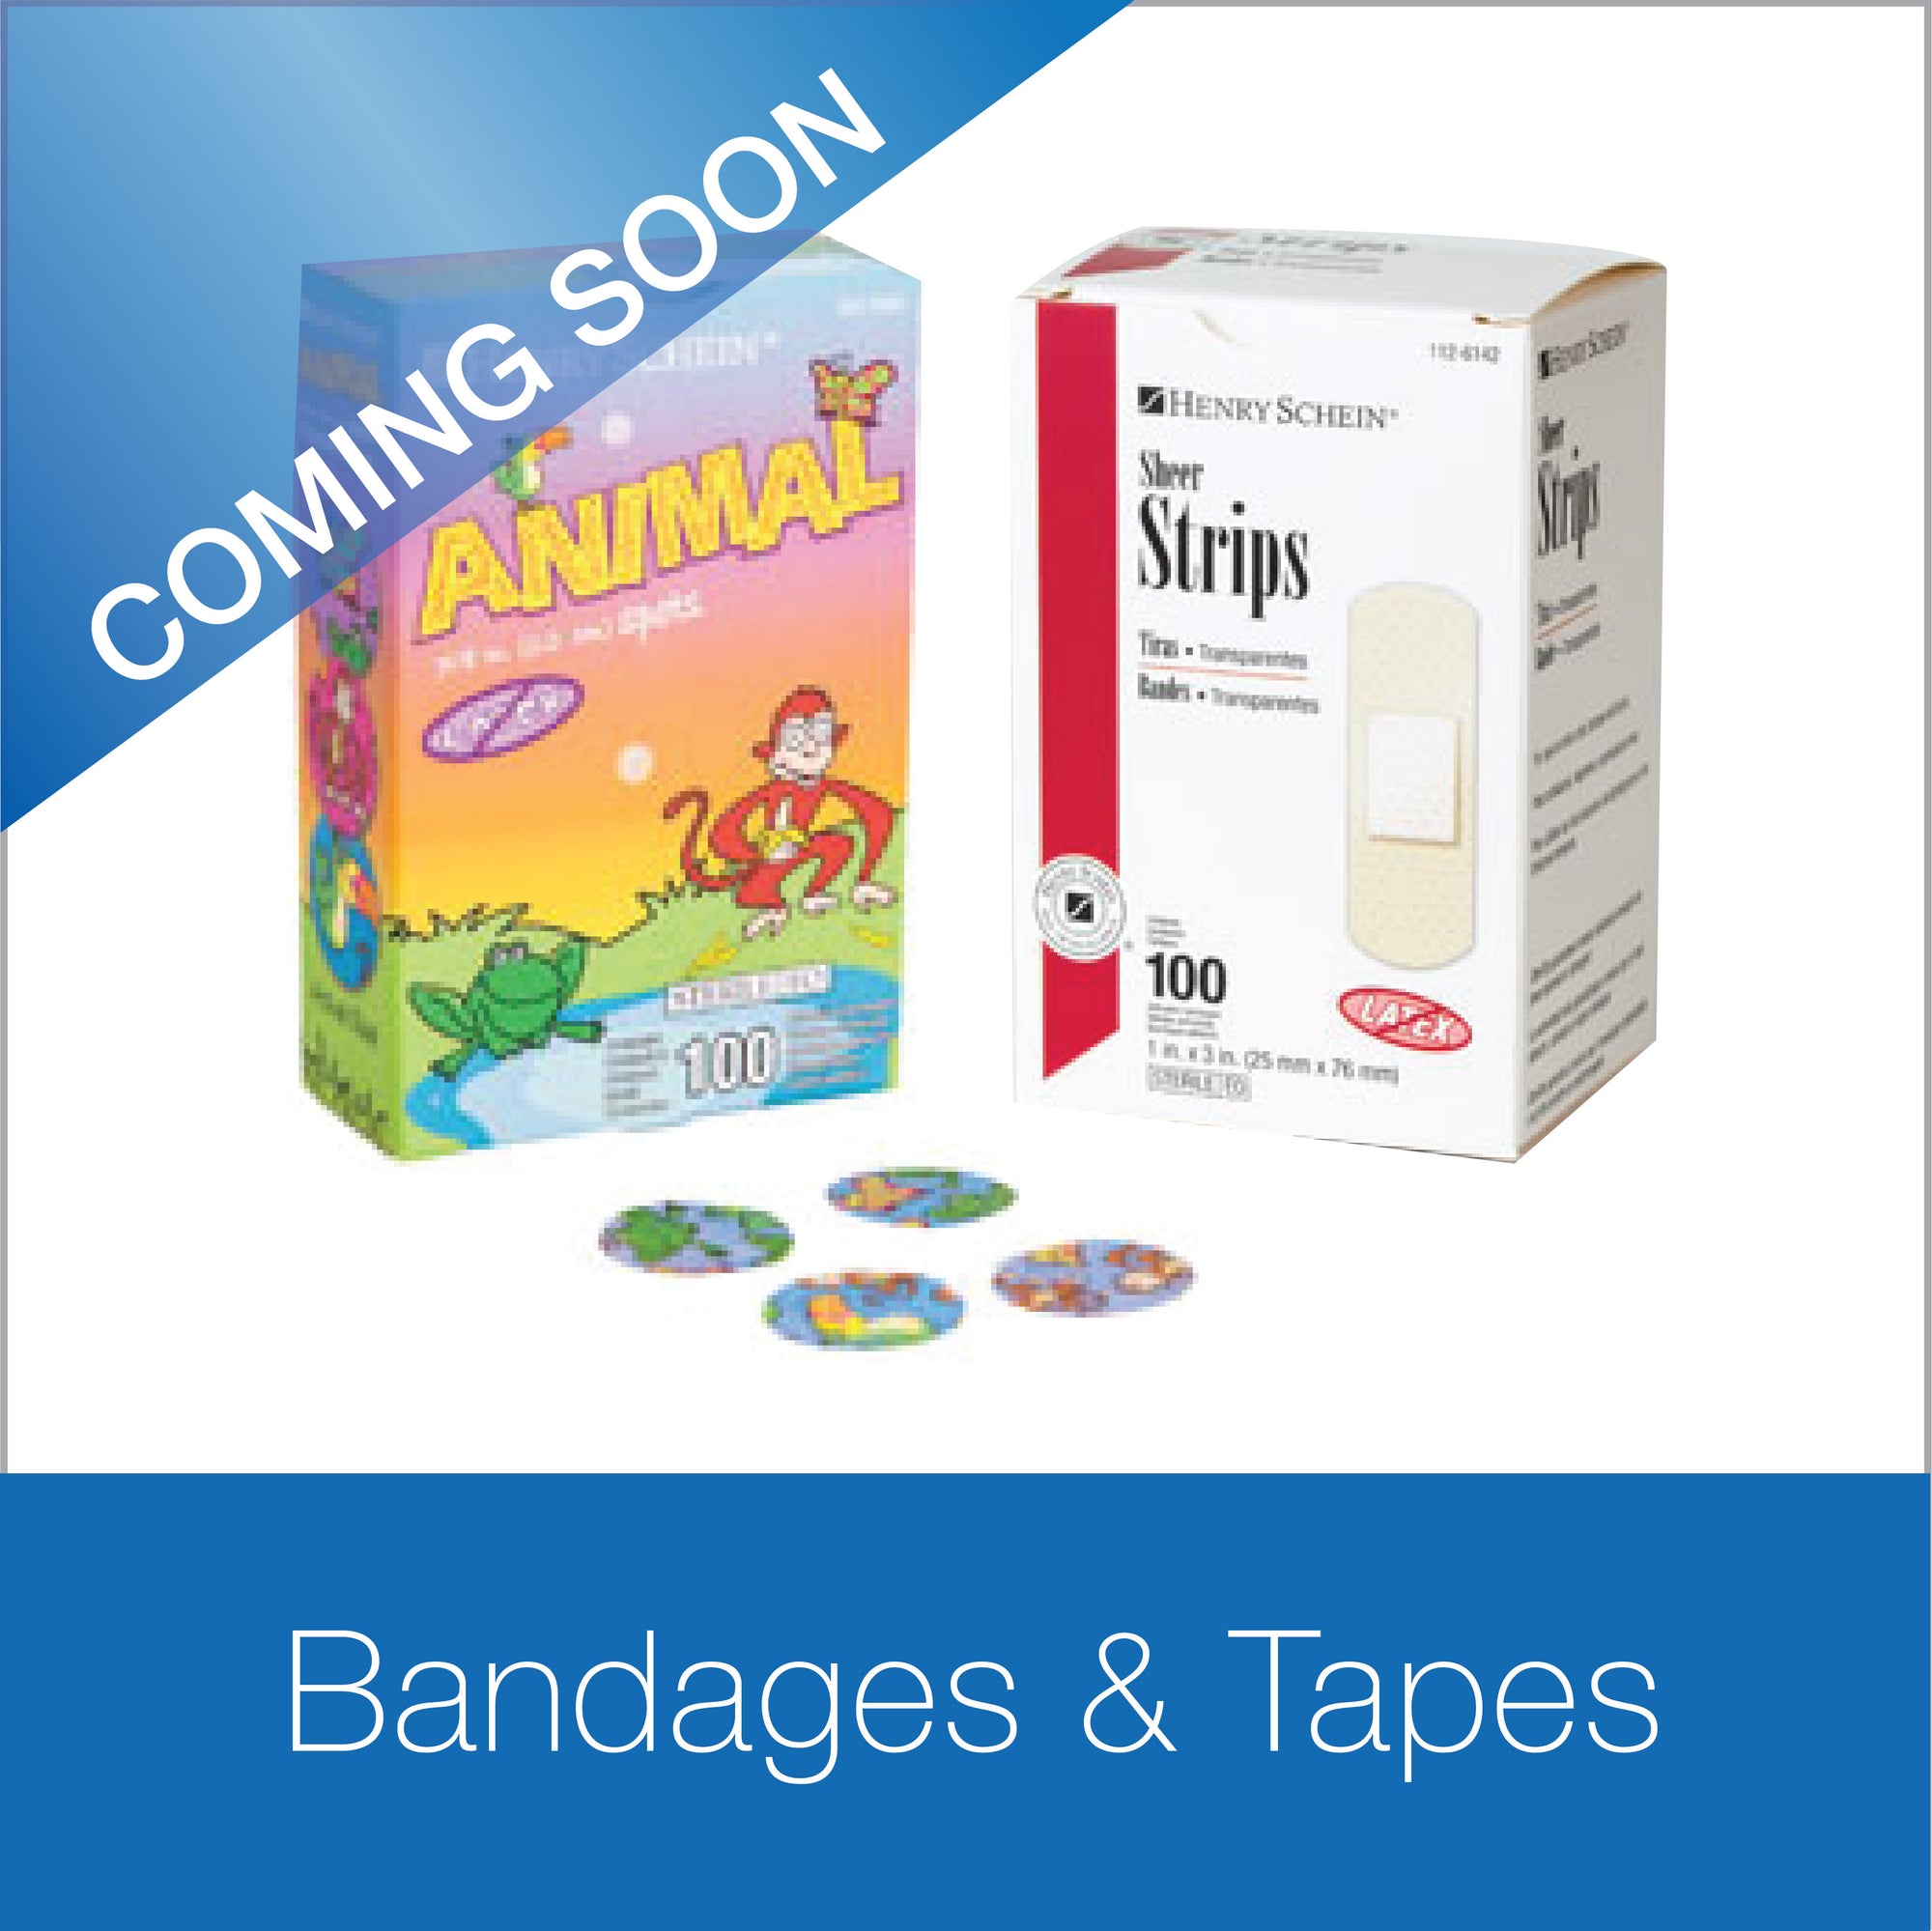 Bandages & Tapes